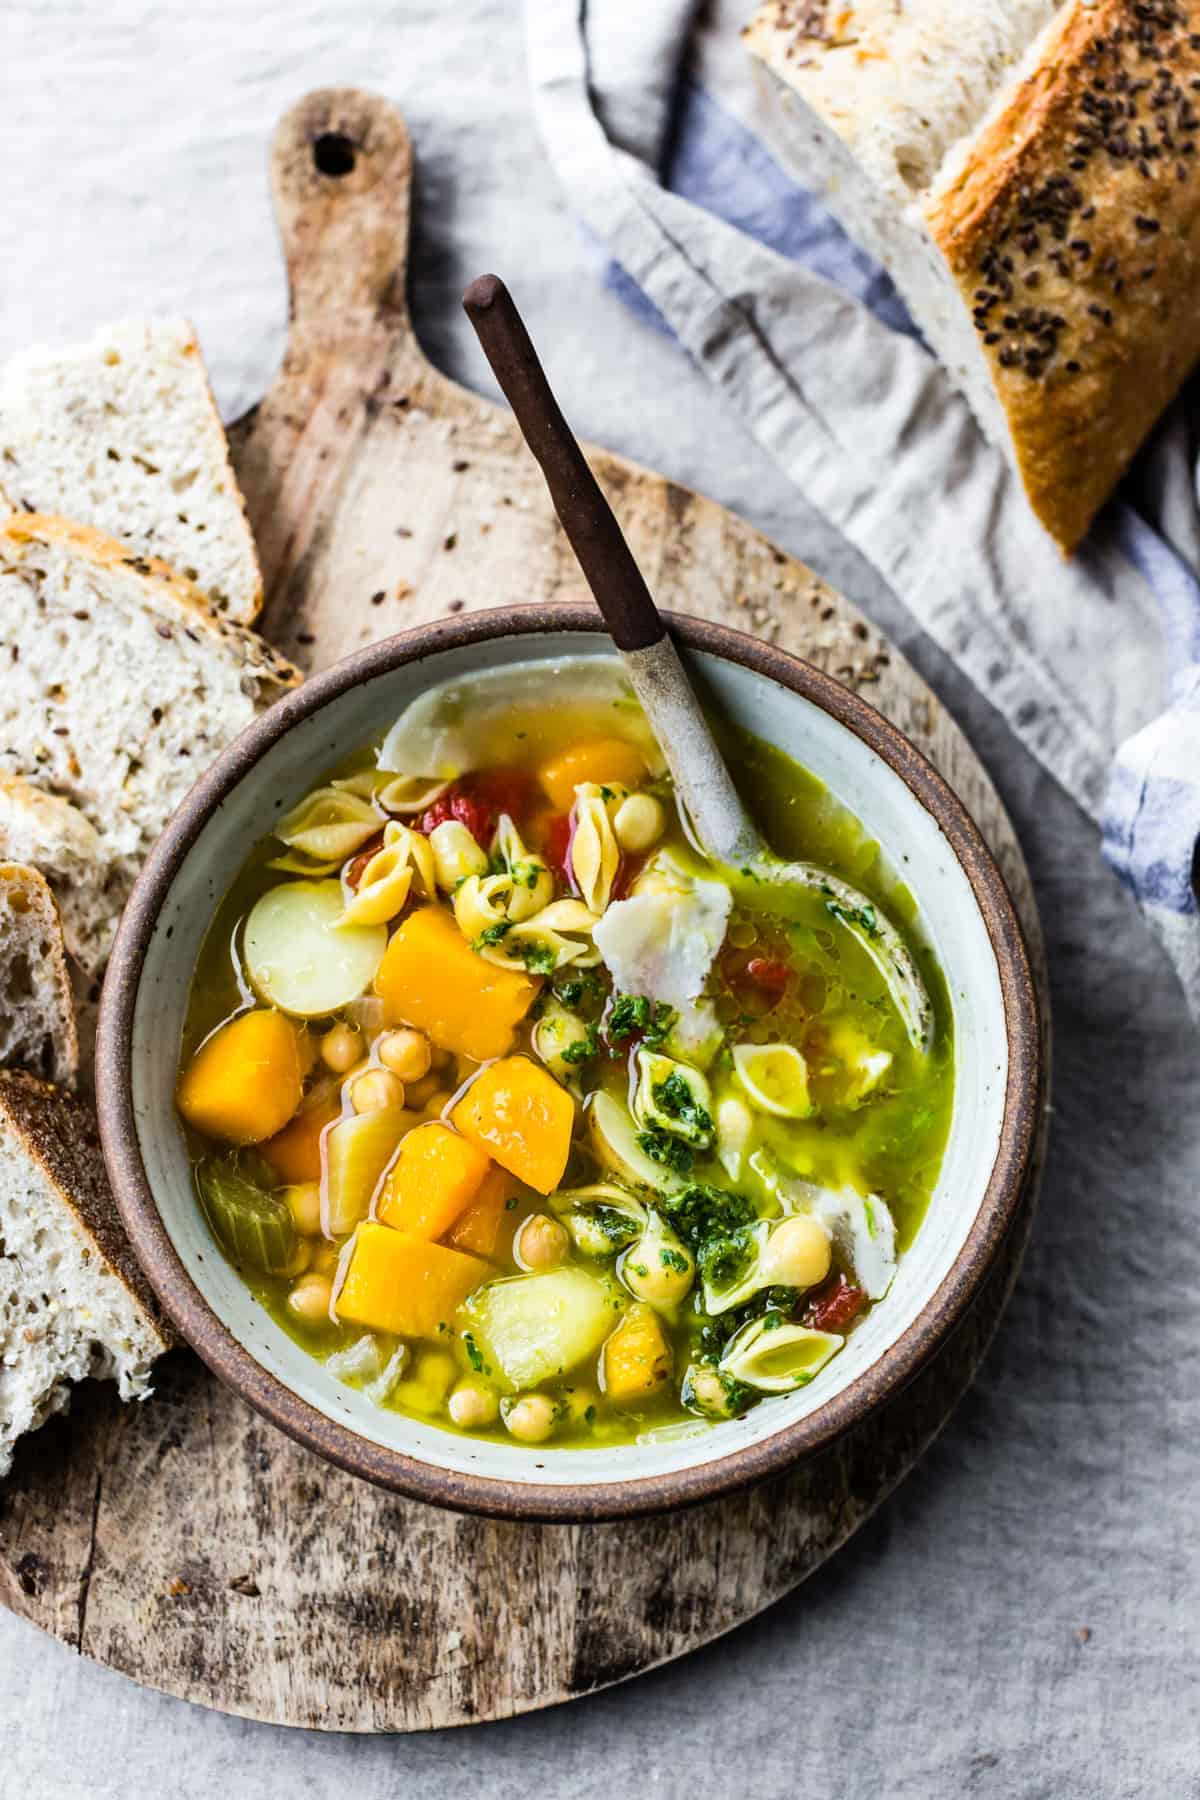 delicious bowl of Vegetarian Minestrone Soup with Chickpeas & Lemon Parsley Oil